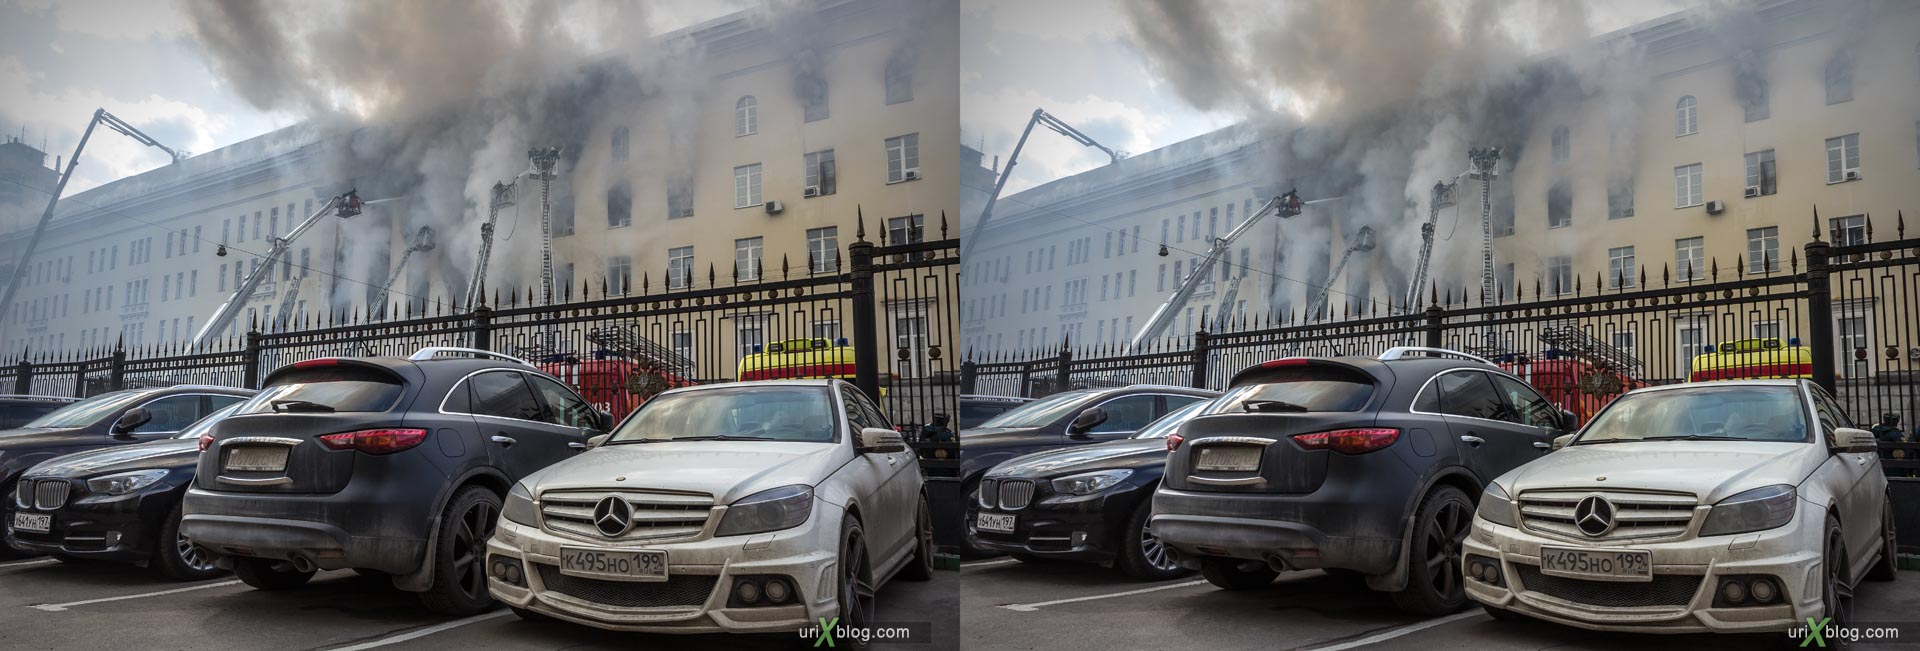 fire, smoke, accident, Ministry of Defense building, Bolshoy Znamensky Lane, Moscow, Russia, city, 3D, stereo pair, cross-eyed, crossview, cross view stereo pair, stereoscopic, 2016